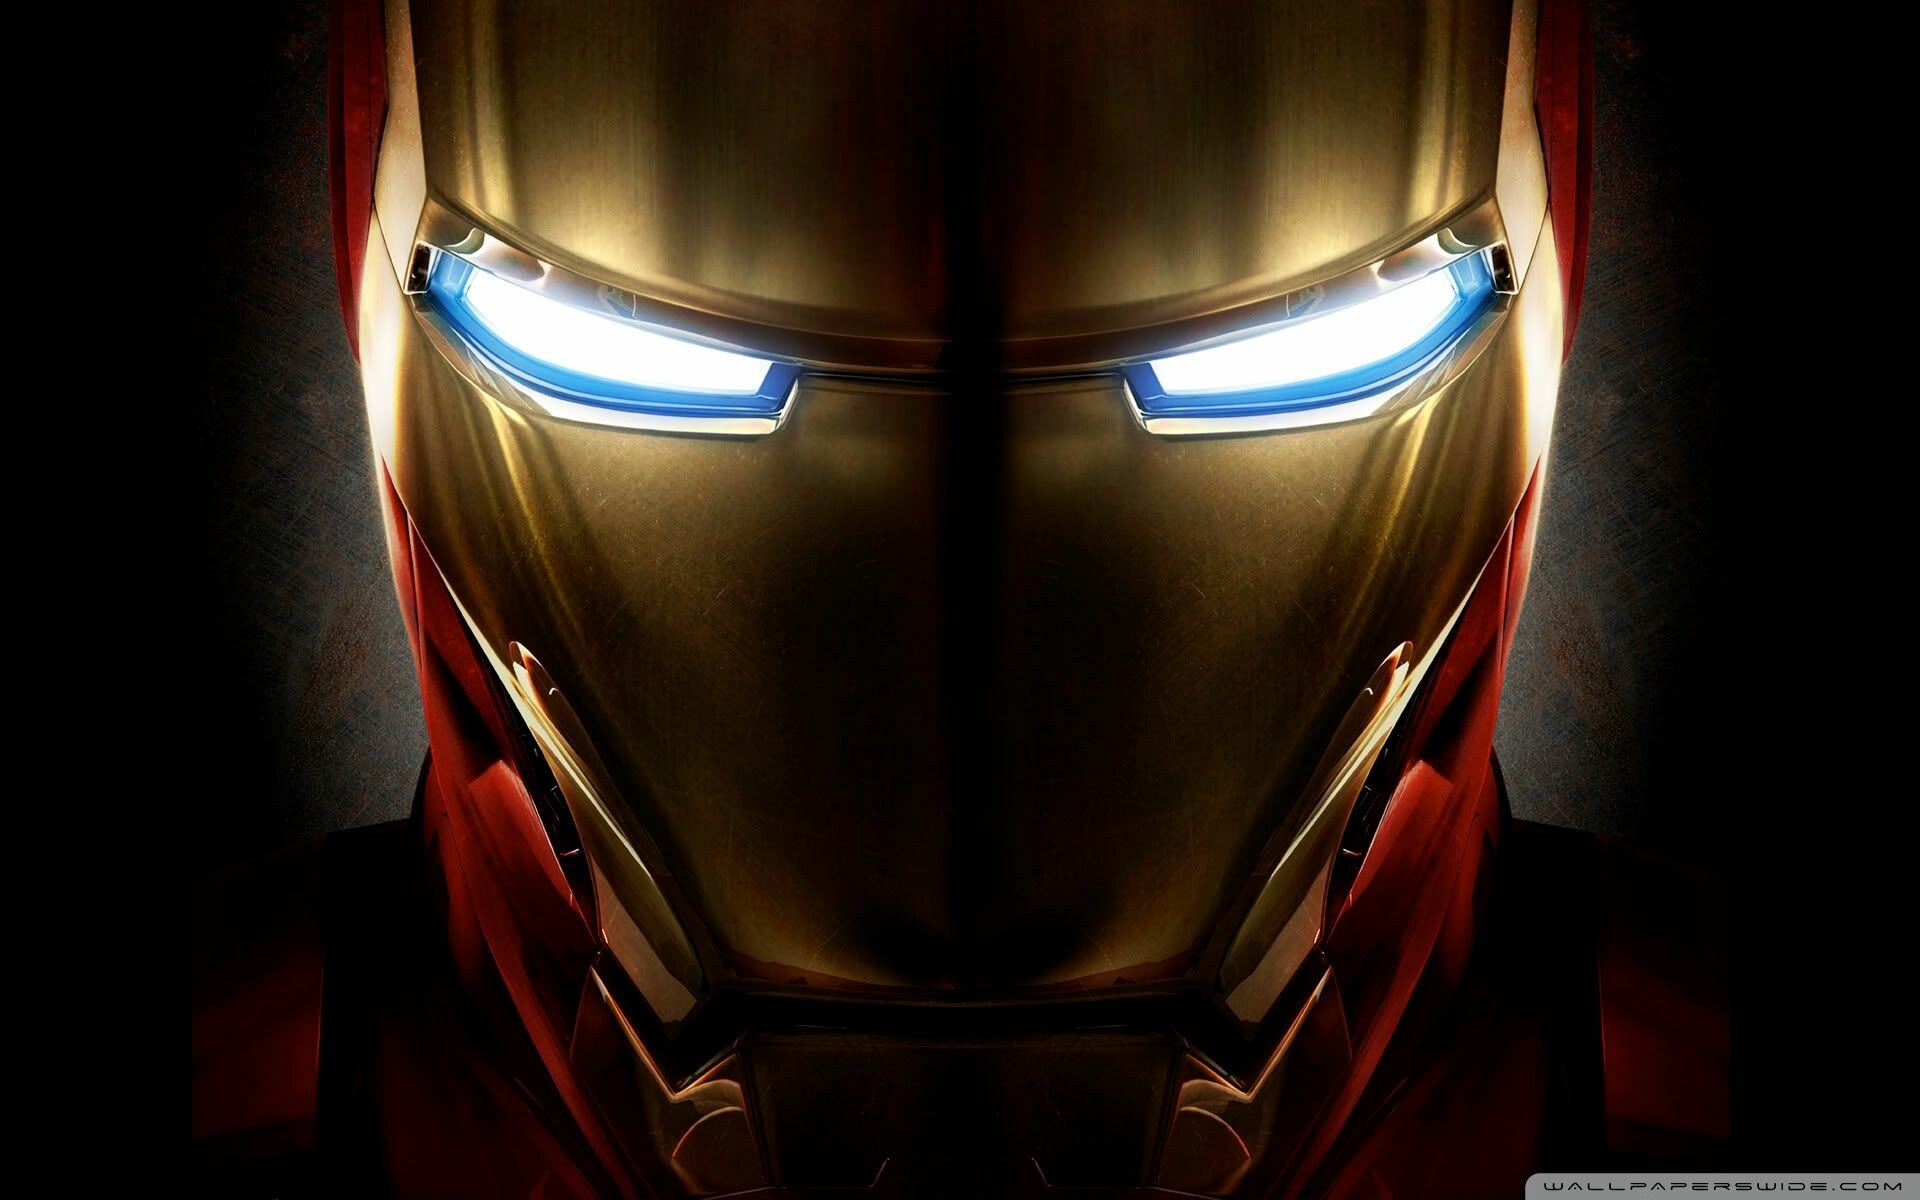 Iron Man Wallpaper: HD, 4K, 5K for PC and Mobile. Download free image for iPhone, Android